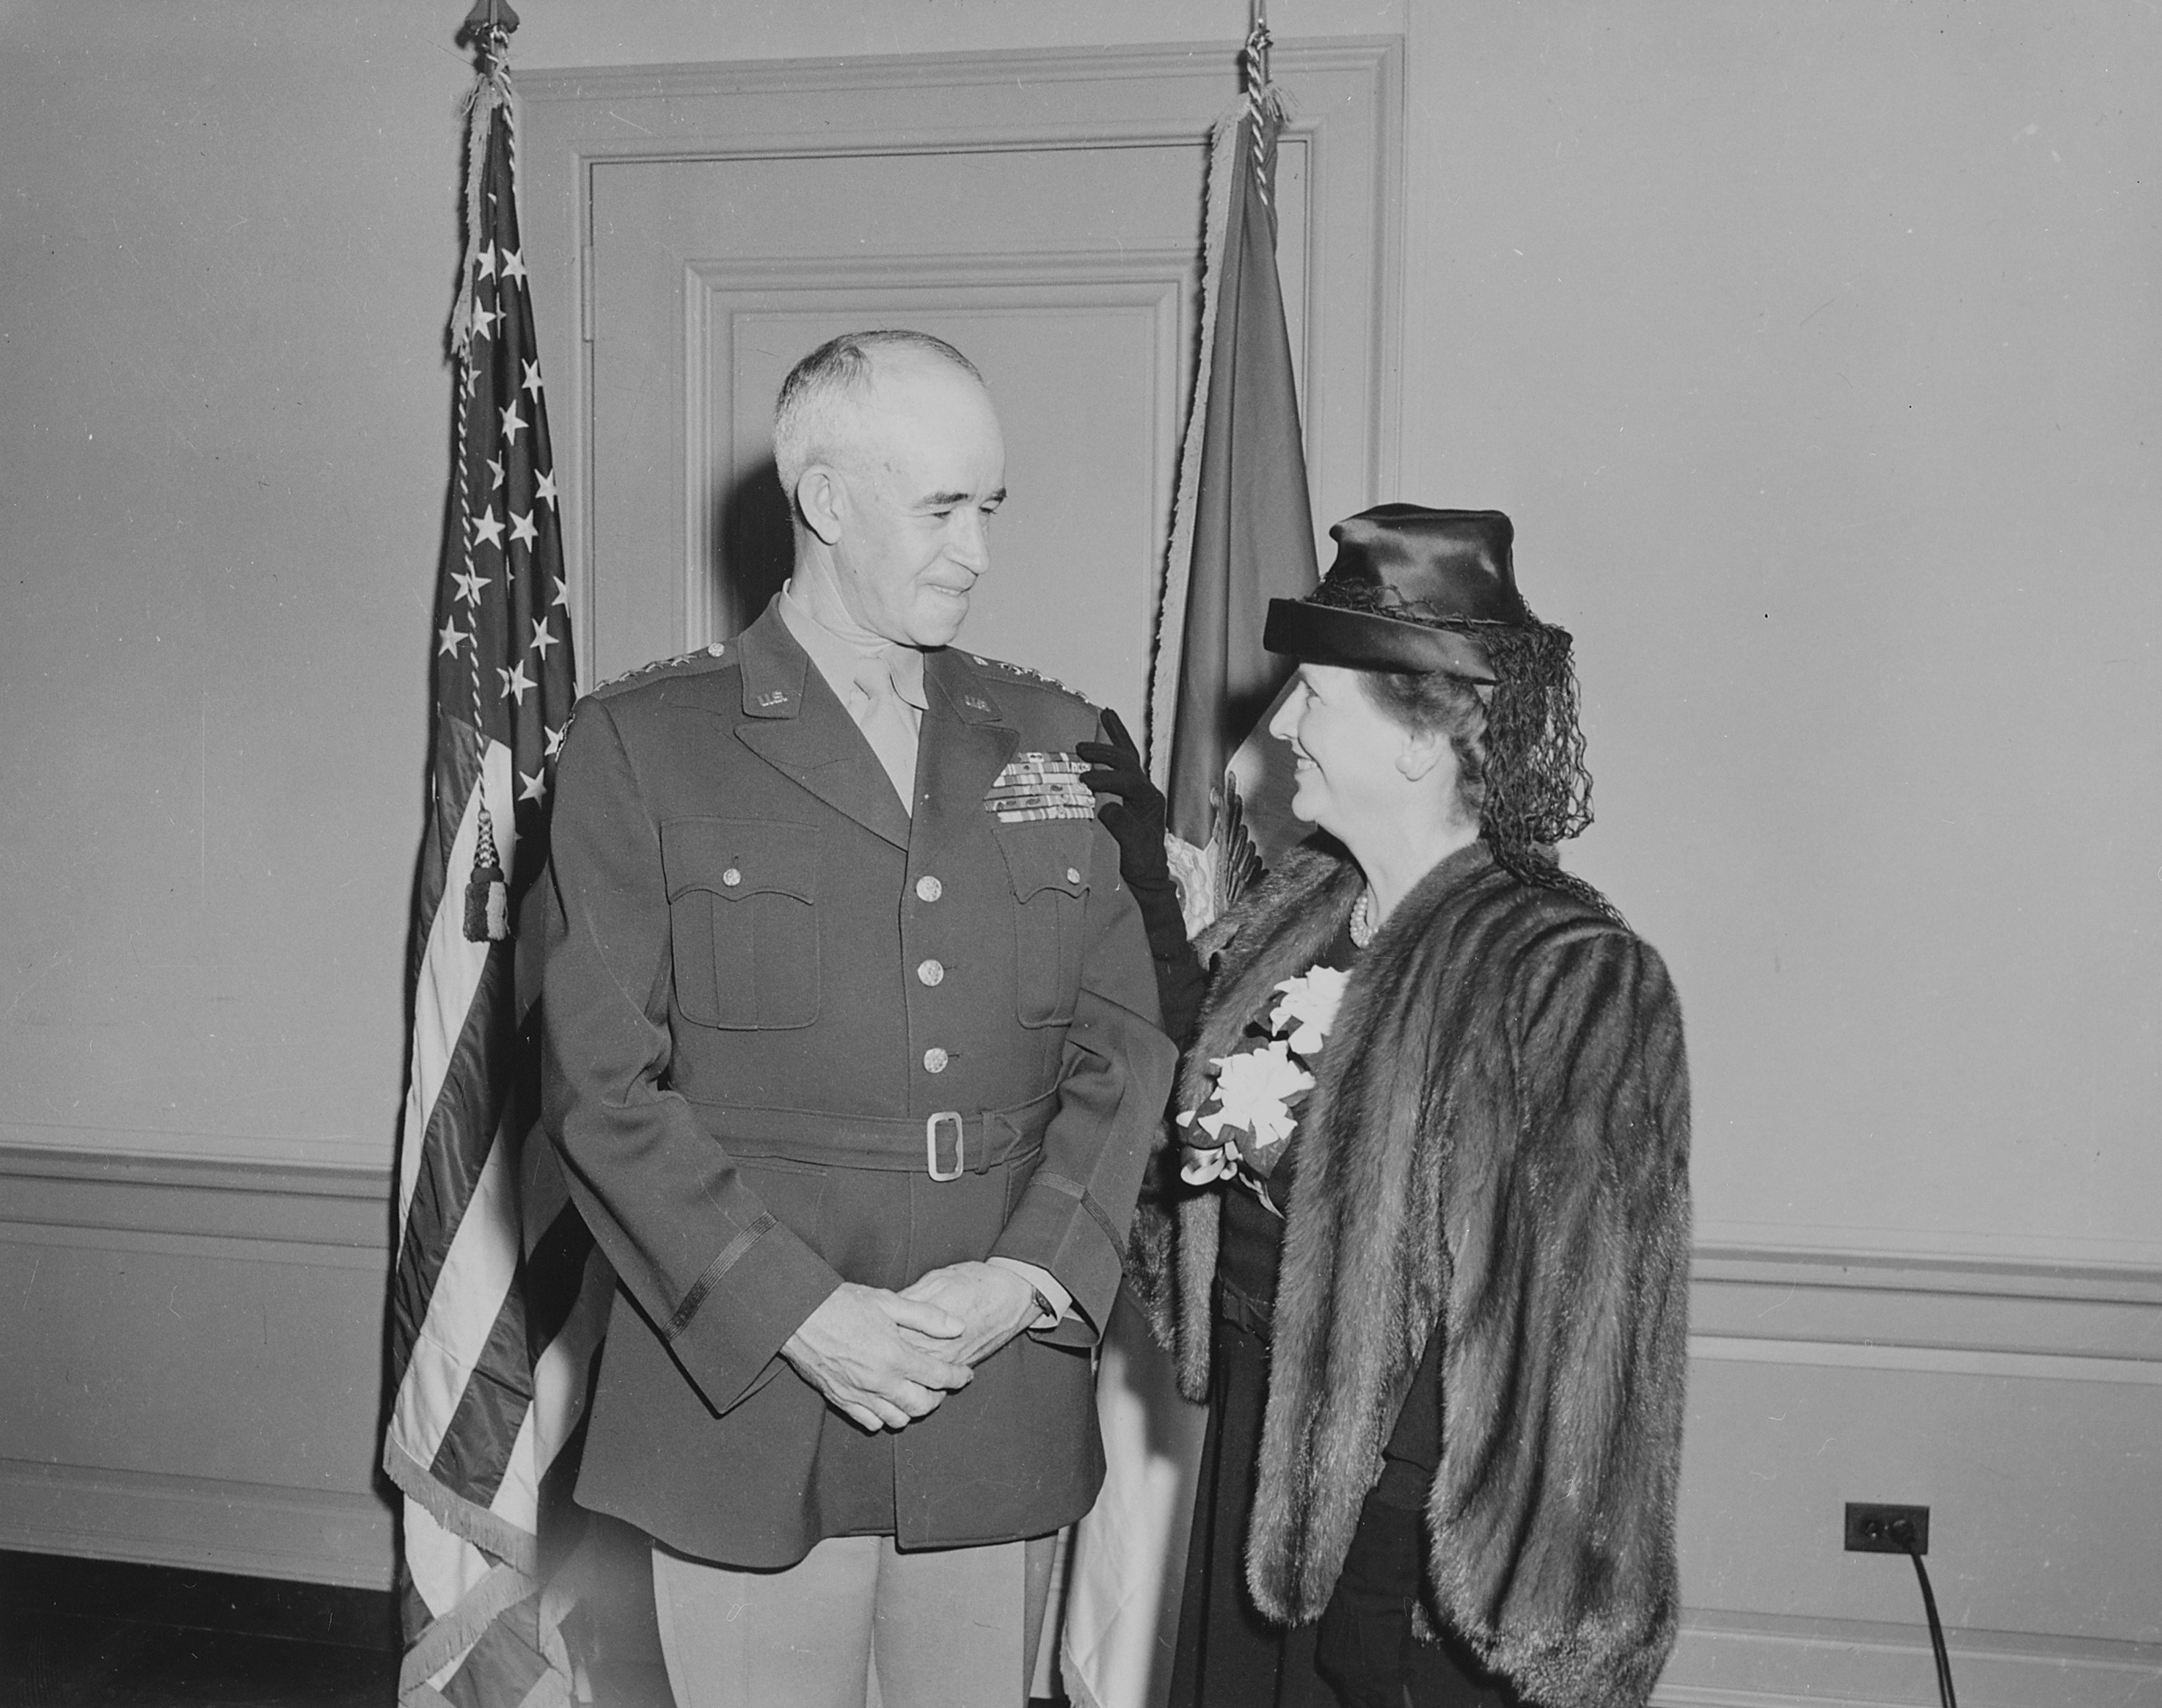 Omar Bradley and his wife after being sworn in as the Chief of Staff of the US Army, Pentagon, Arlington, Virginia, United States, 7 Feb 1948